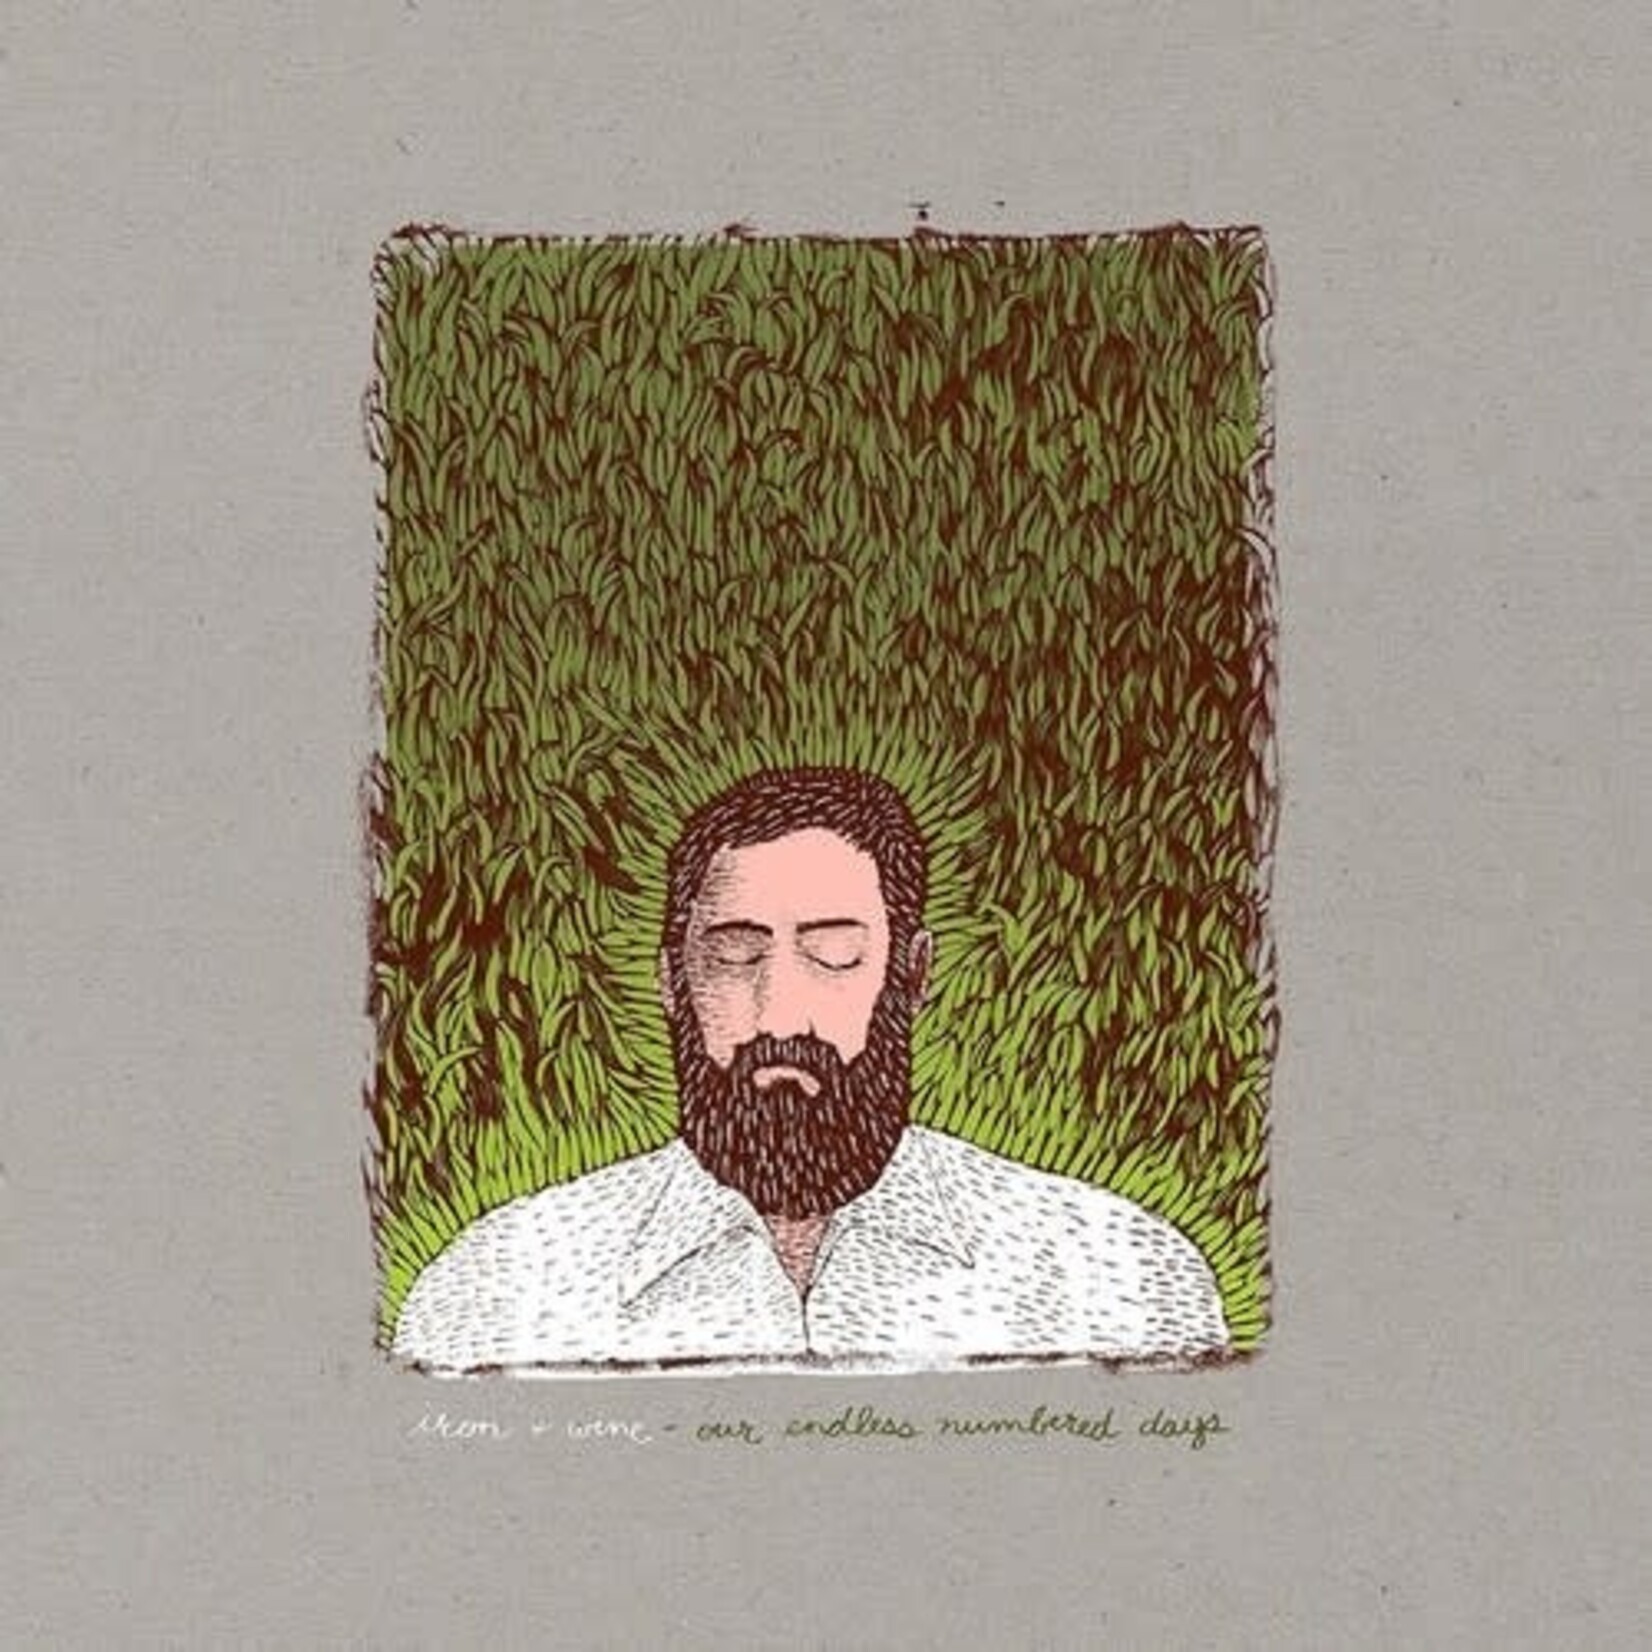 Sub Pop Iron & Wine - Our Endless Numbered Days (2LP) [Deluxe]